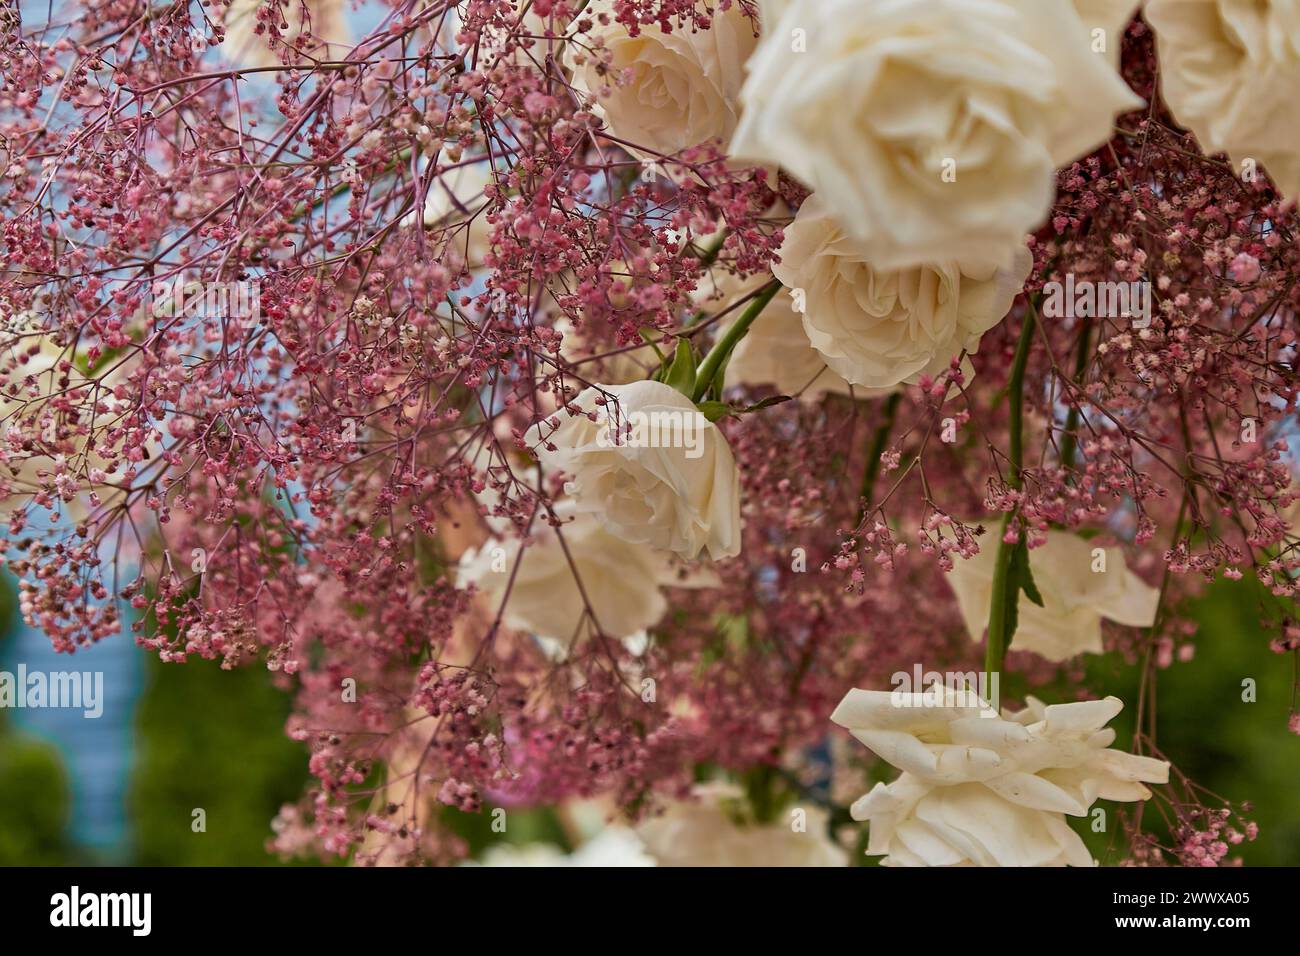 Delicate pink gypsophila and white roses against a soft-focus background.Themes of love and delicate beauty Stock Photo